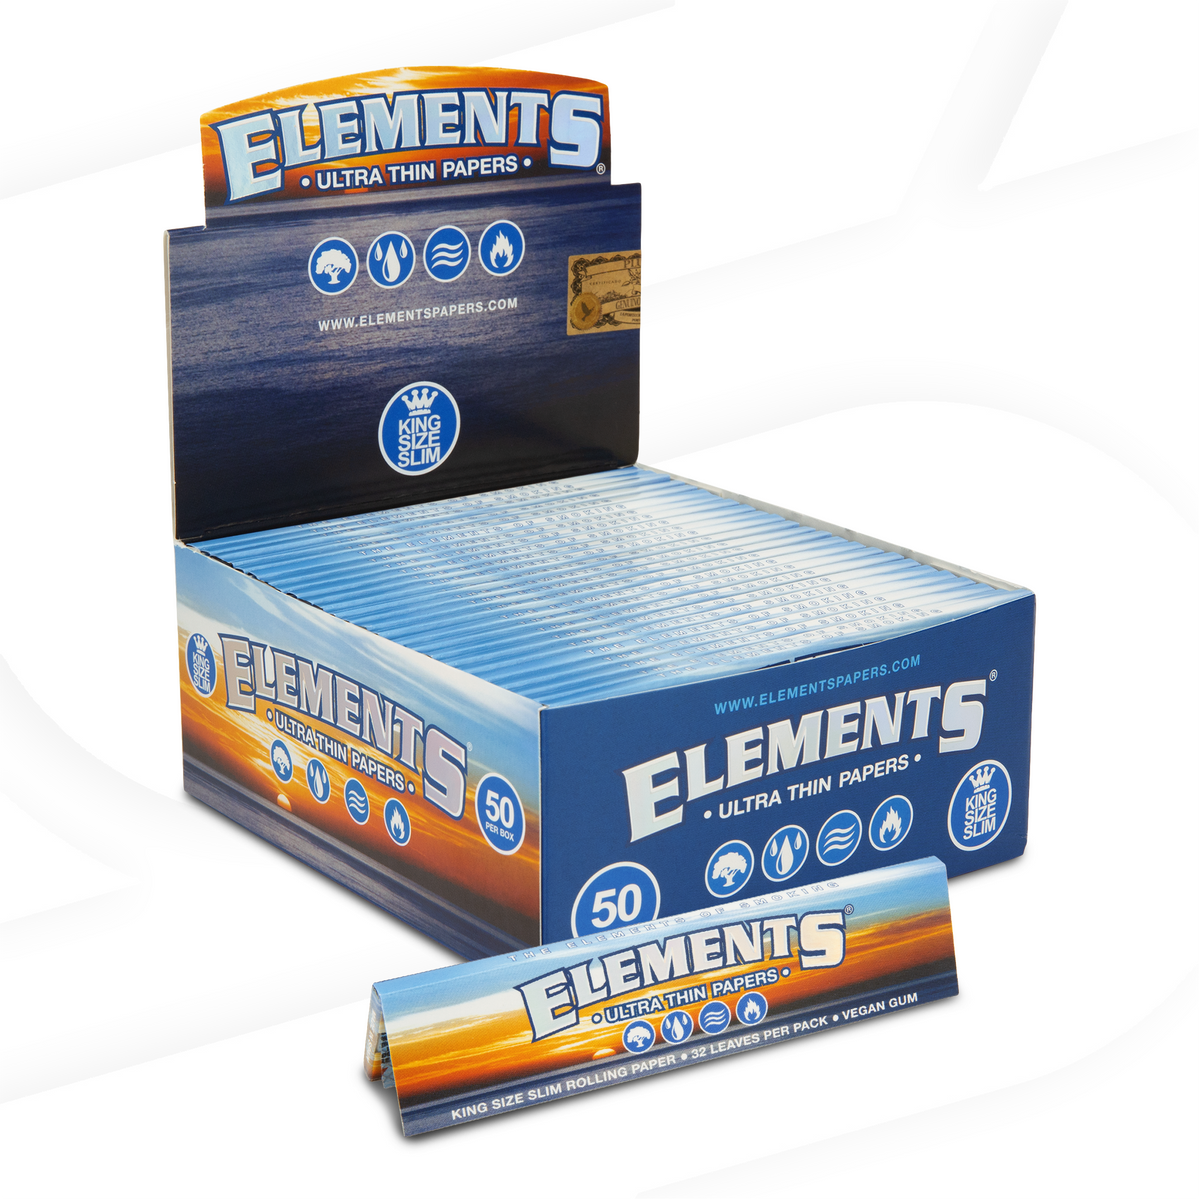 Elements King Size Slim Rolling Papers Rolling Papers ELEB-RPRC-KL03 esd-official